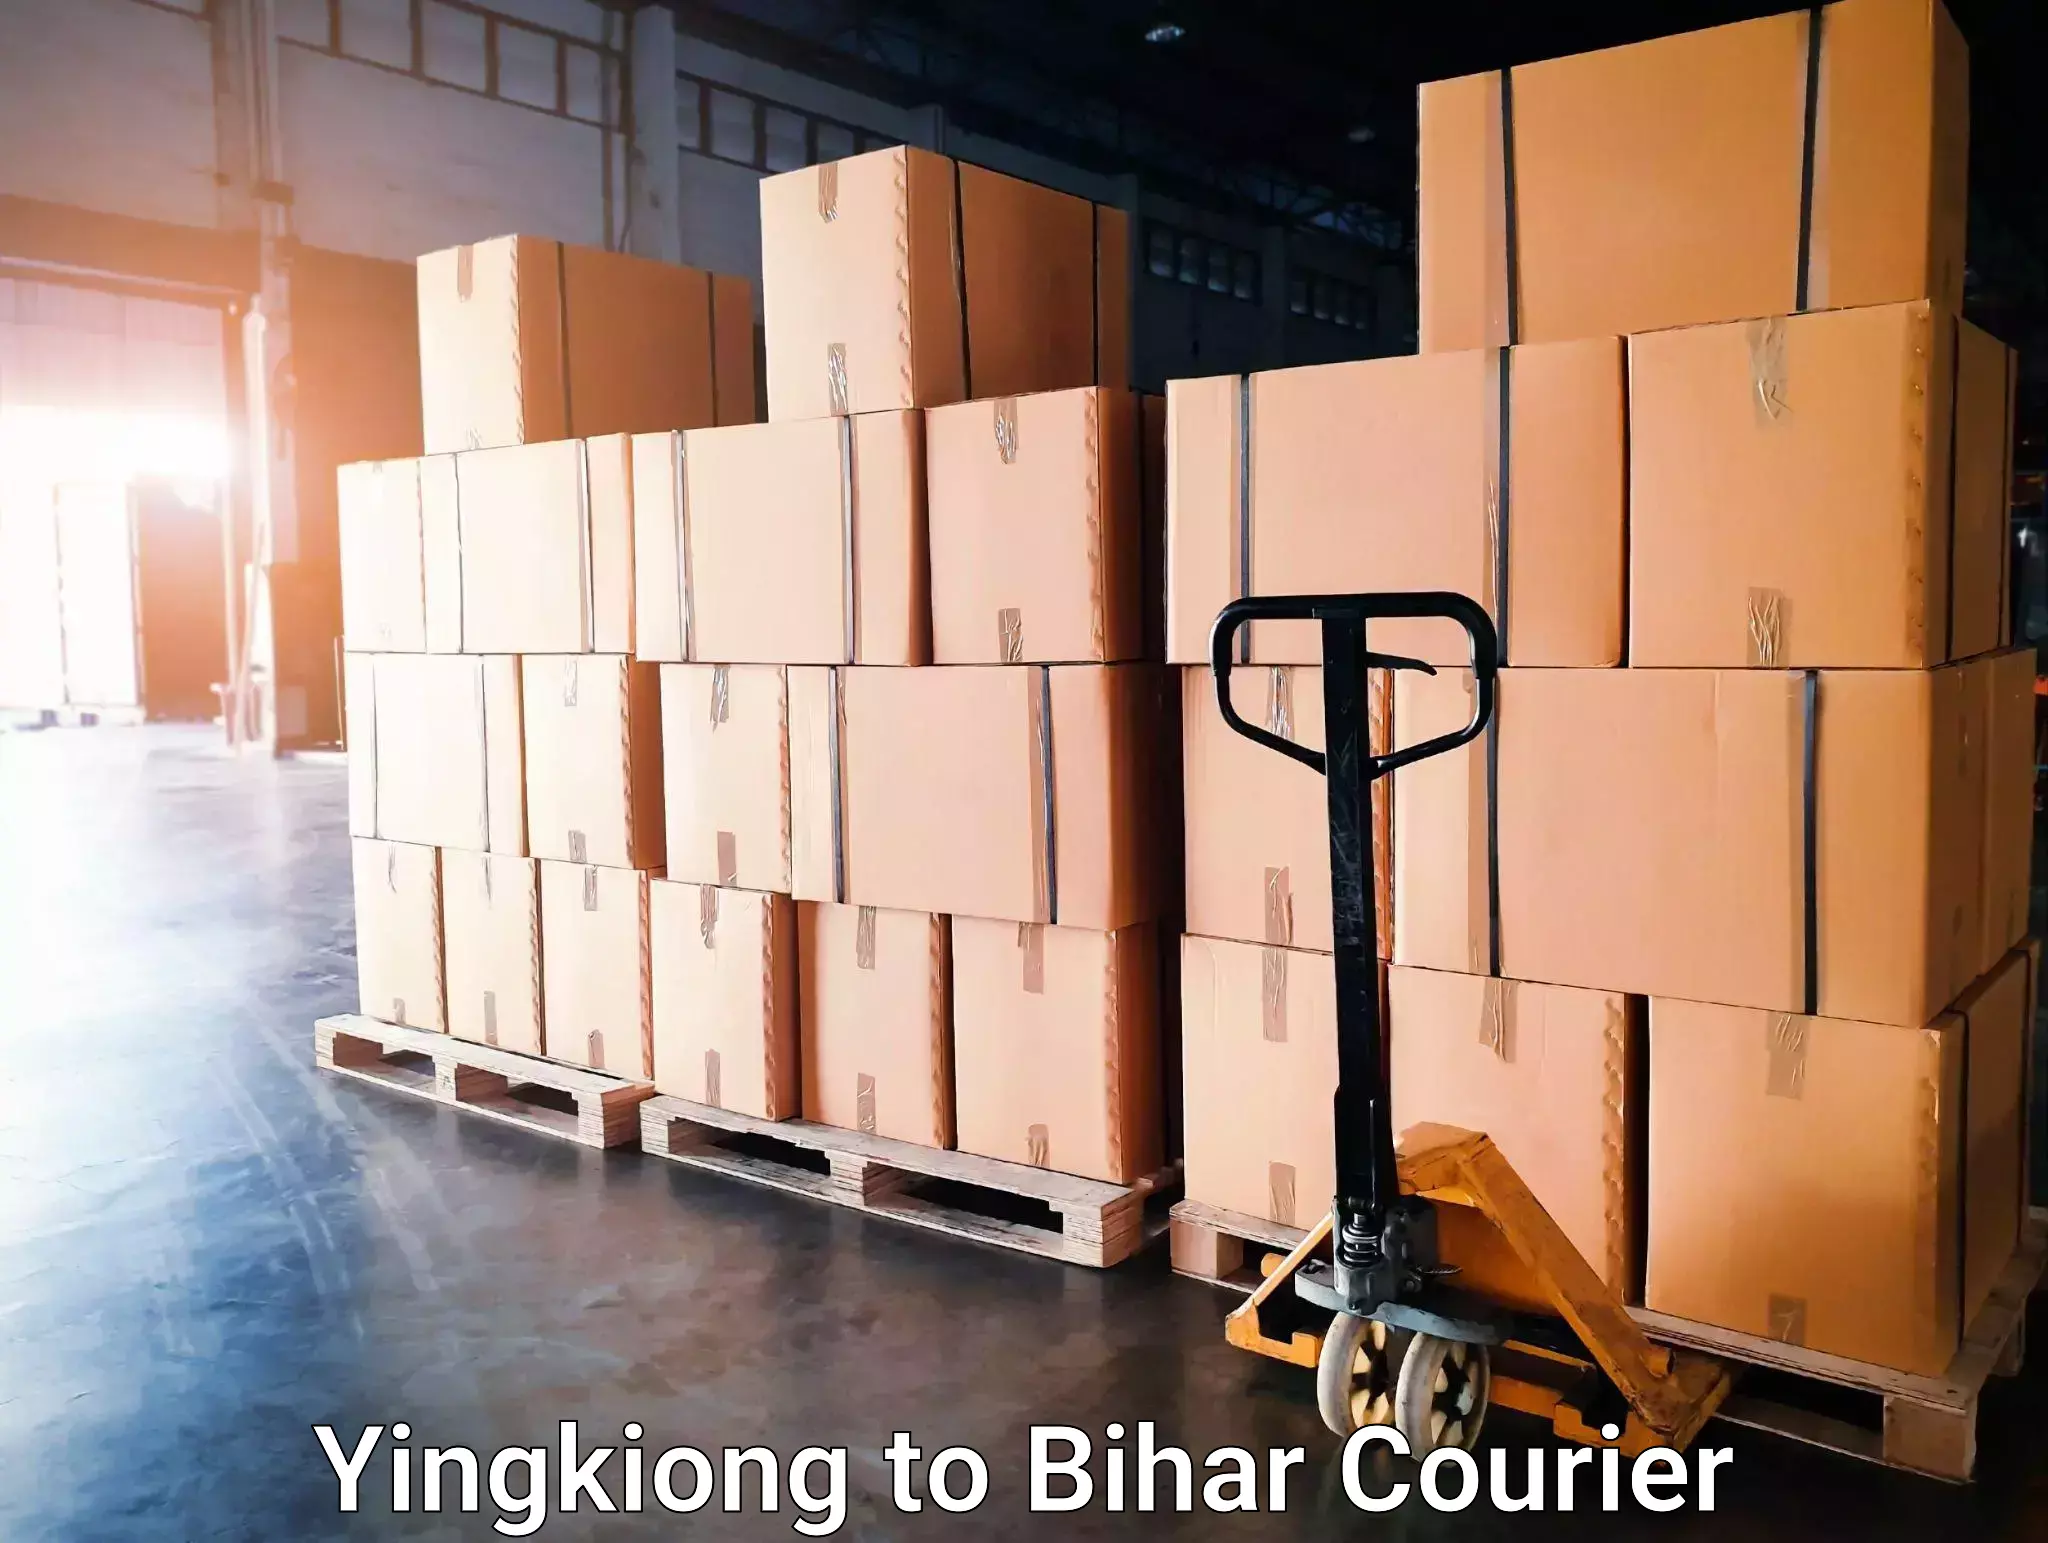 Courier service comparison Yingkiong to Runni Saidpur